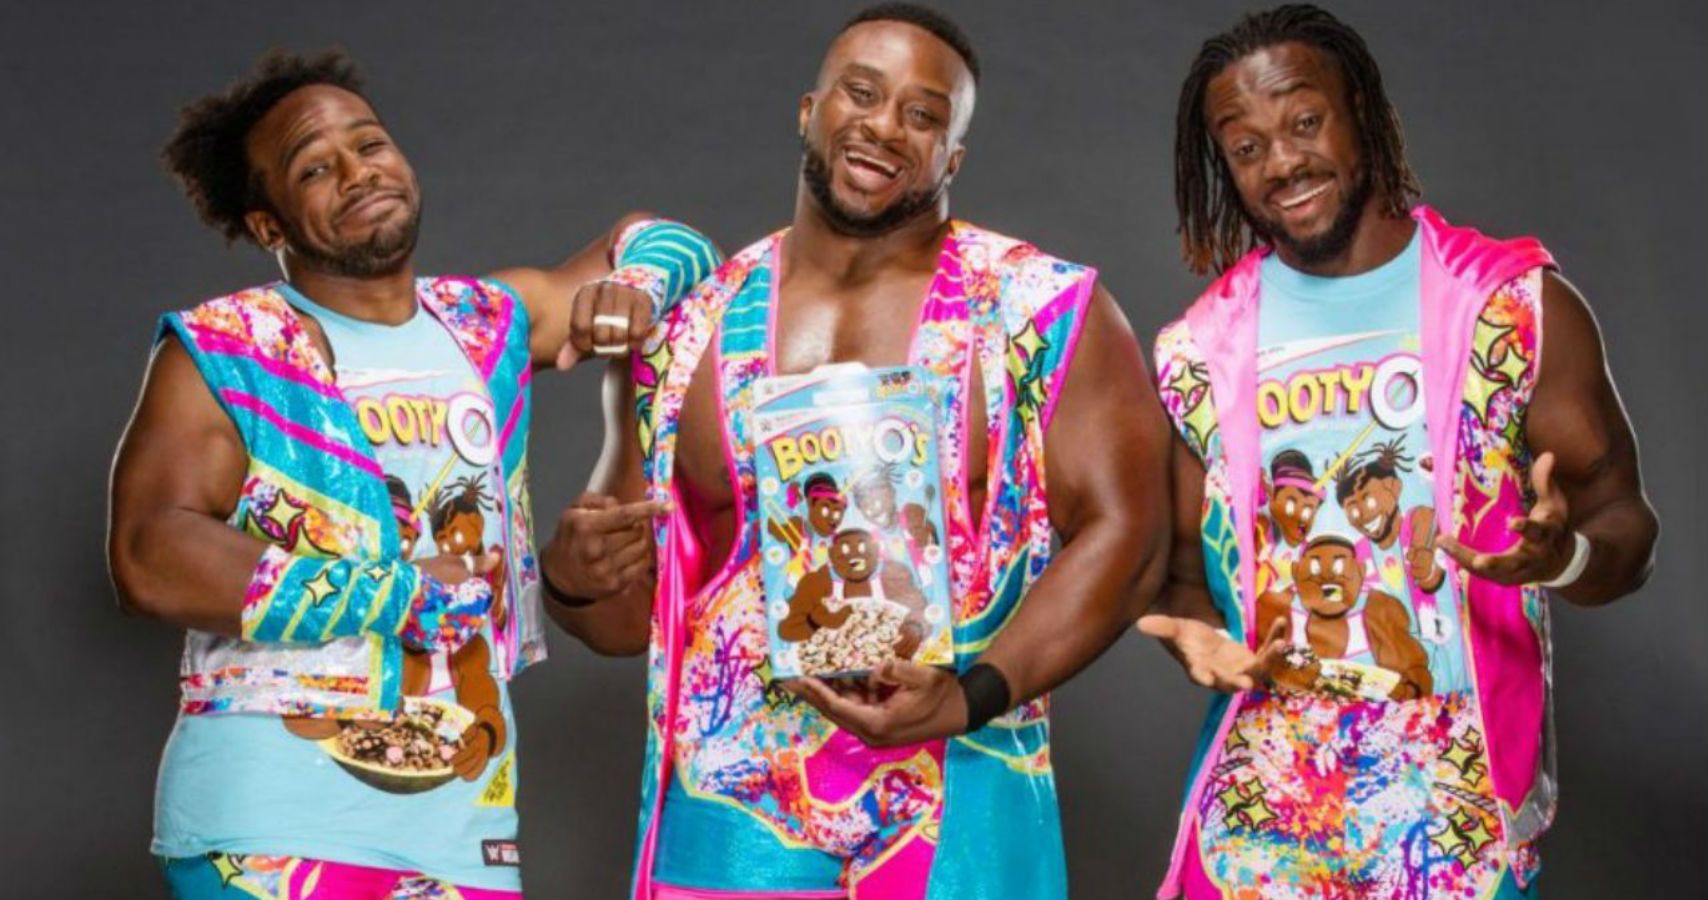 New Day Has Now Been Together Longer Than Any Other Stable In WWE History